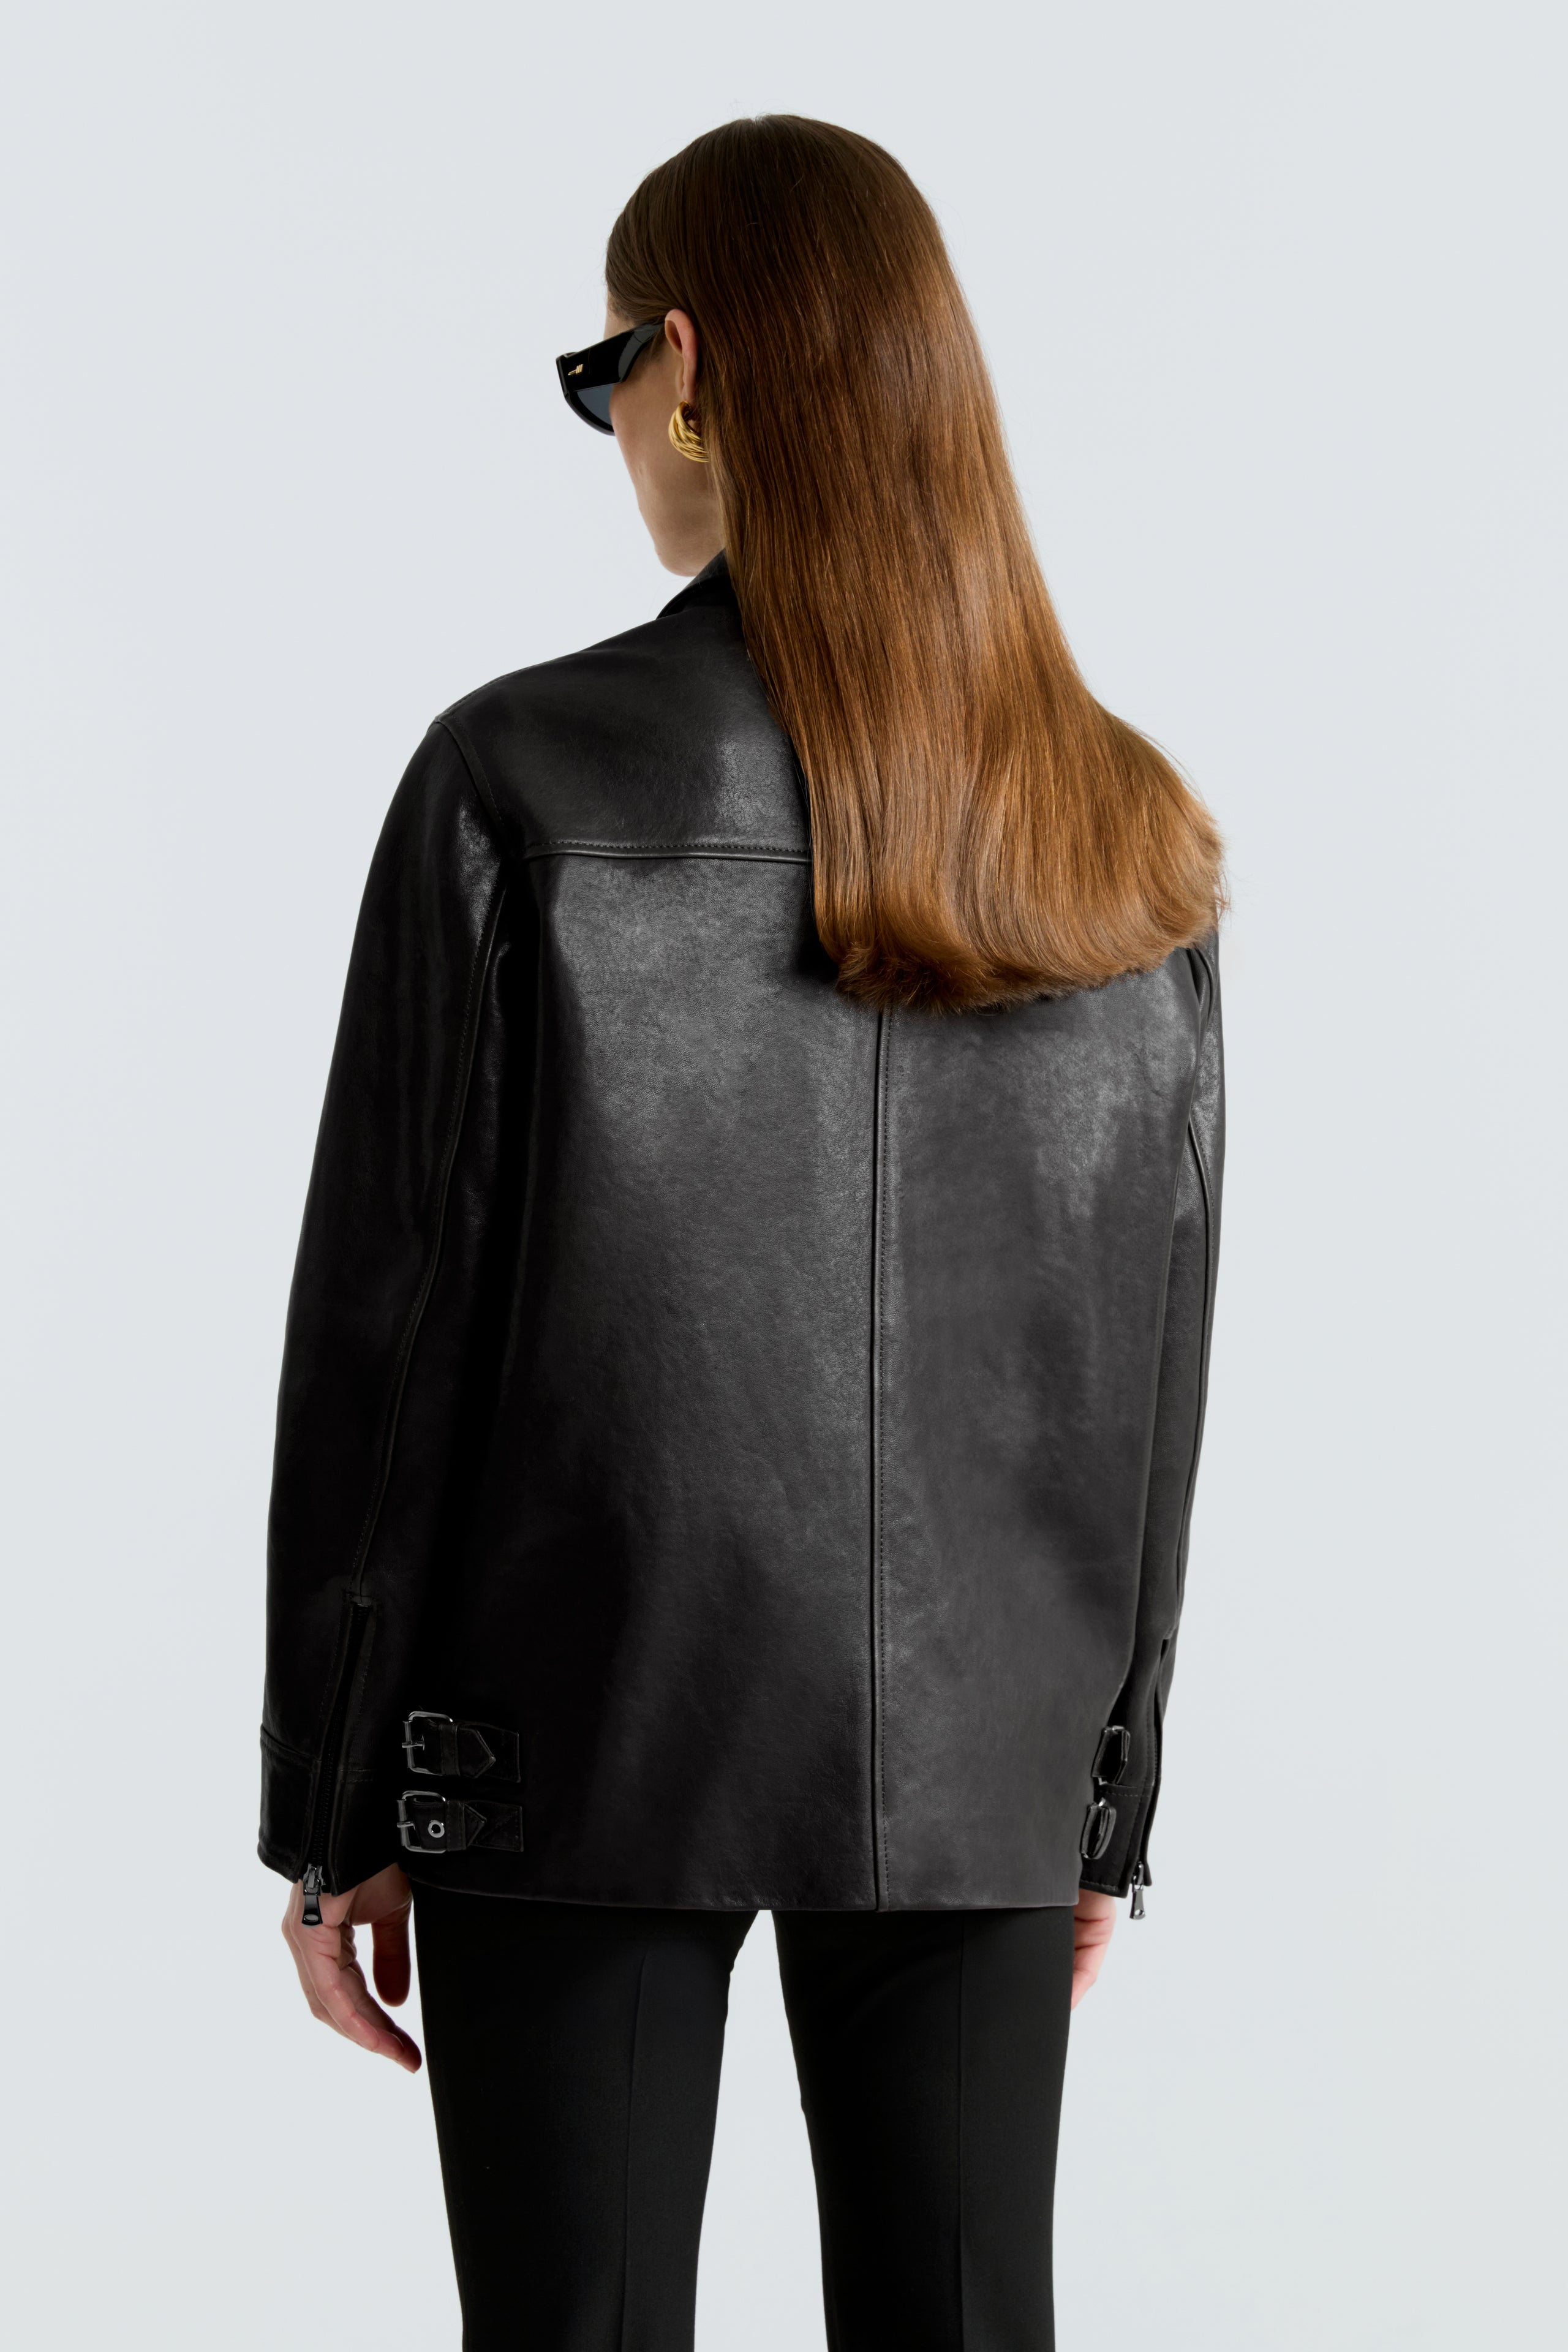 Model is wearing the Rayan Black Utilitarian Leather Jacket Back